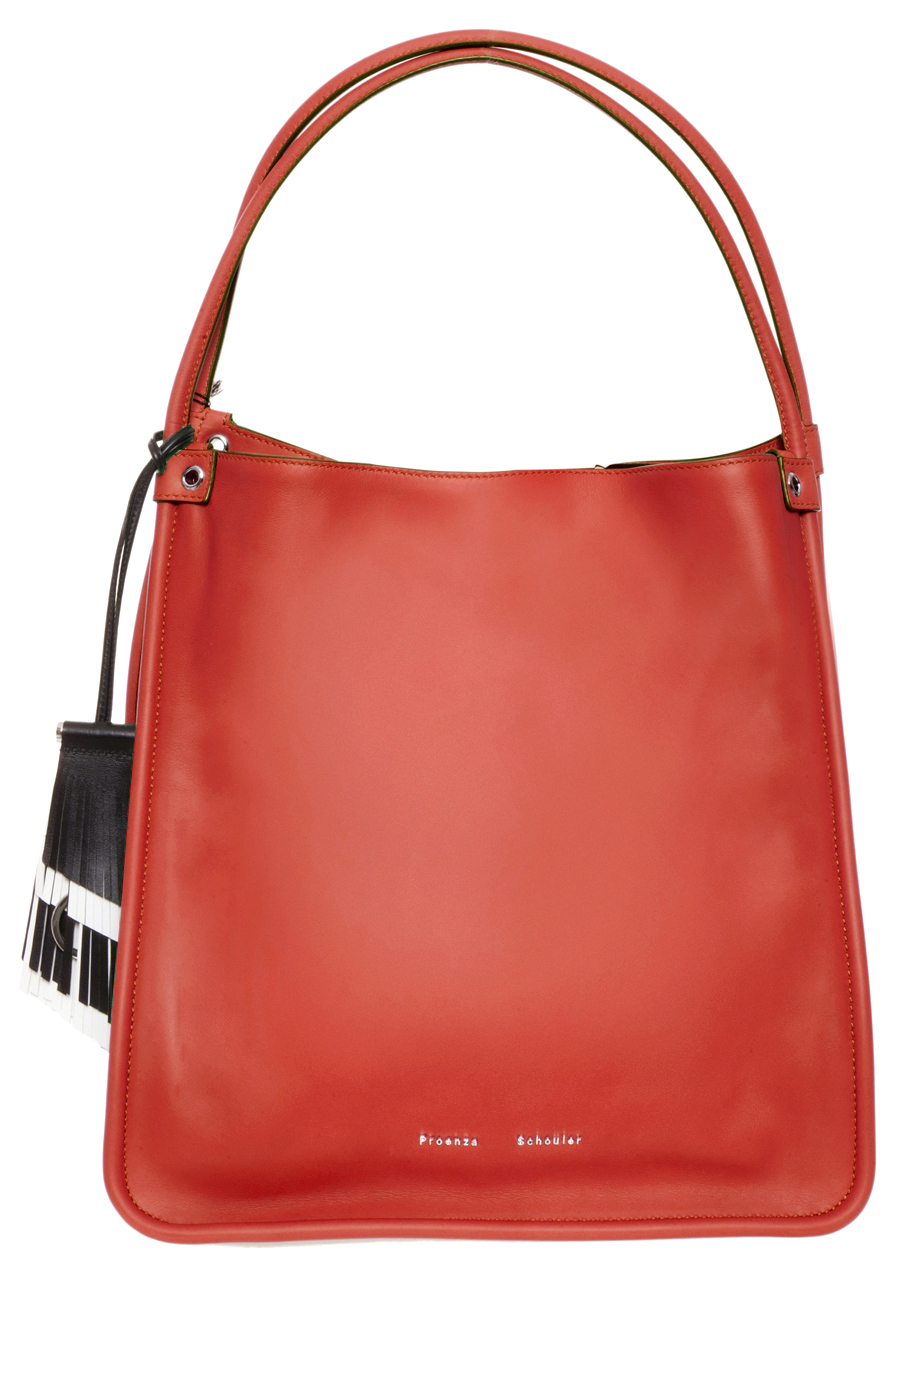 Lyst - Proenza Schouler Soft Leather Tote Bag in Red